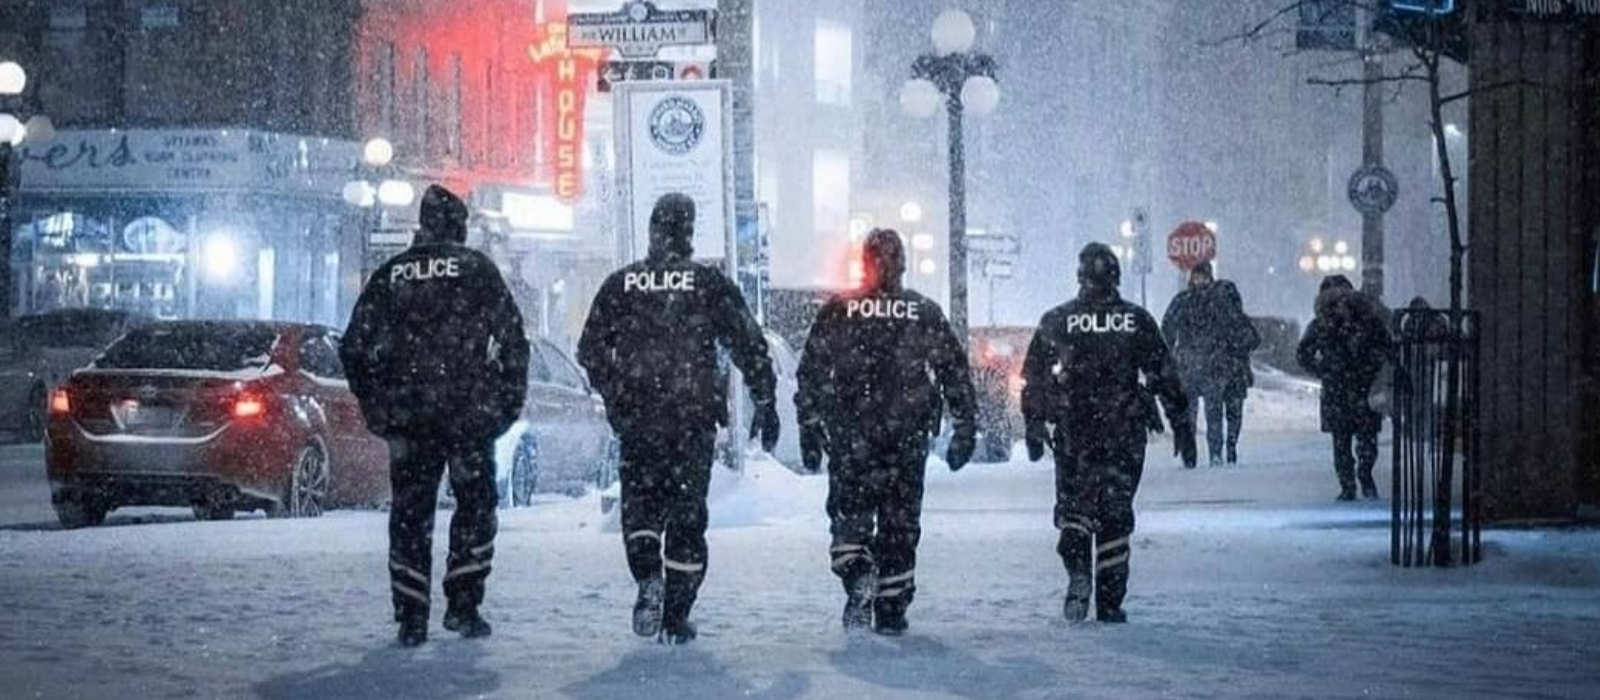 Image of Ottawa Police Services officers out on patrol